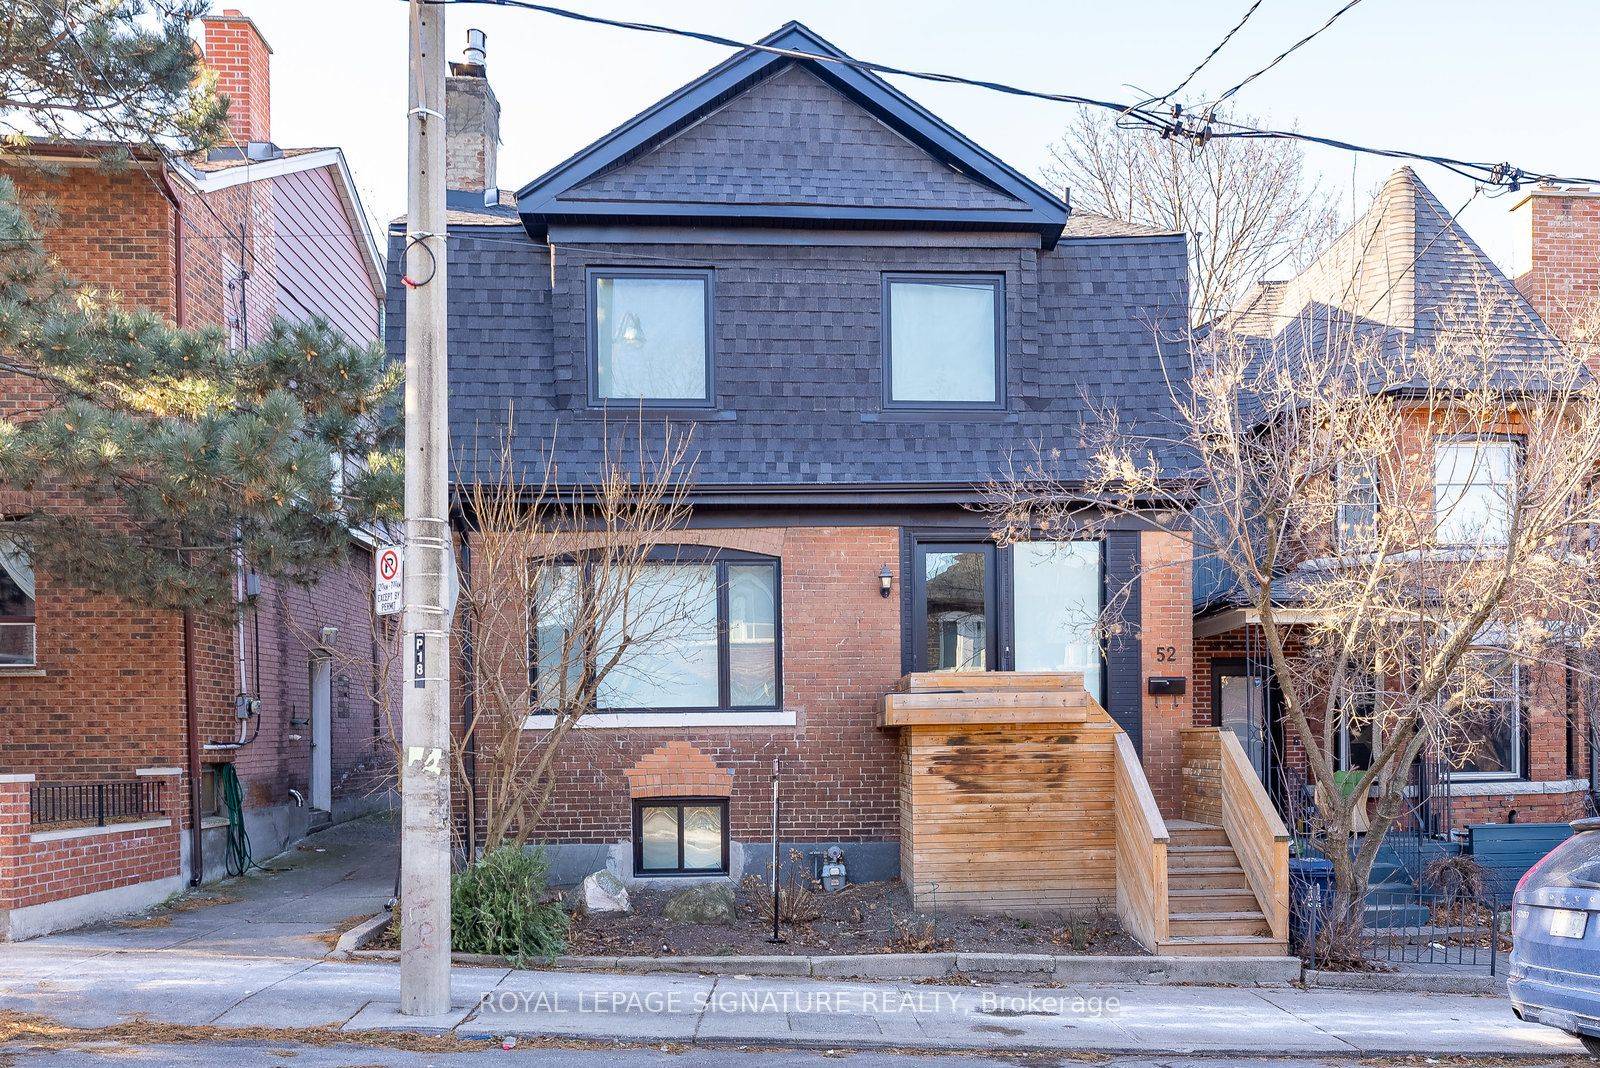 Discover the allure of this beautifully renovated detached home in the heart of Toronto's vibrant Little Portugal, near Trinity Bellwoods and Little Italy.